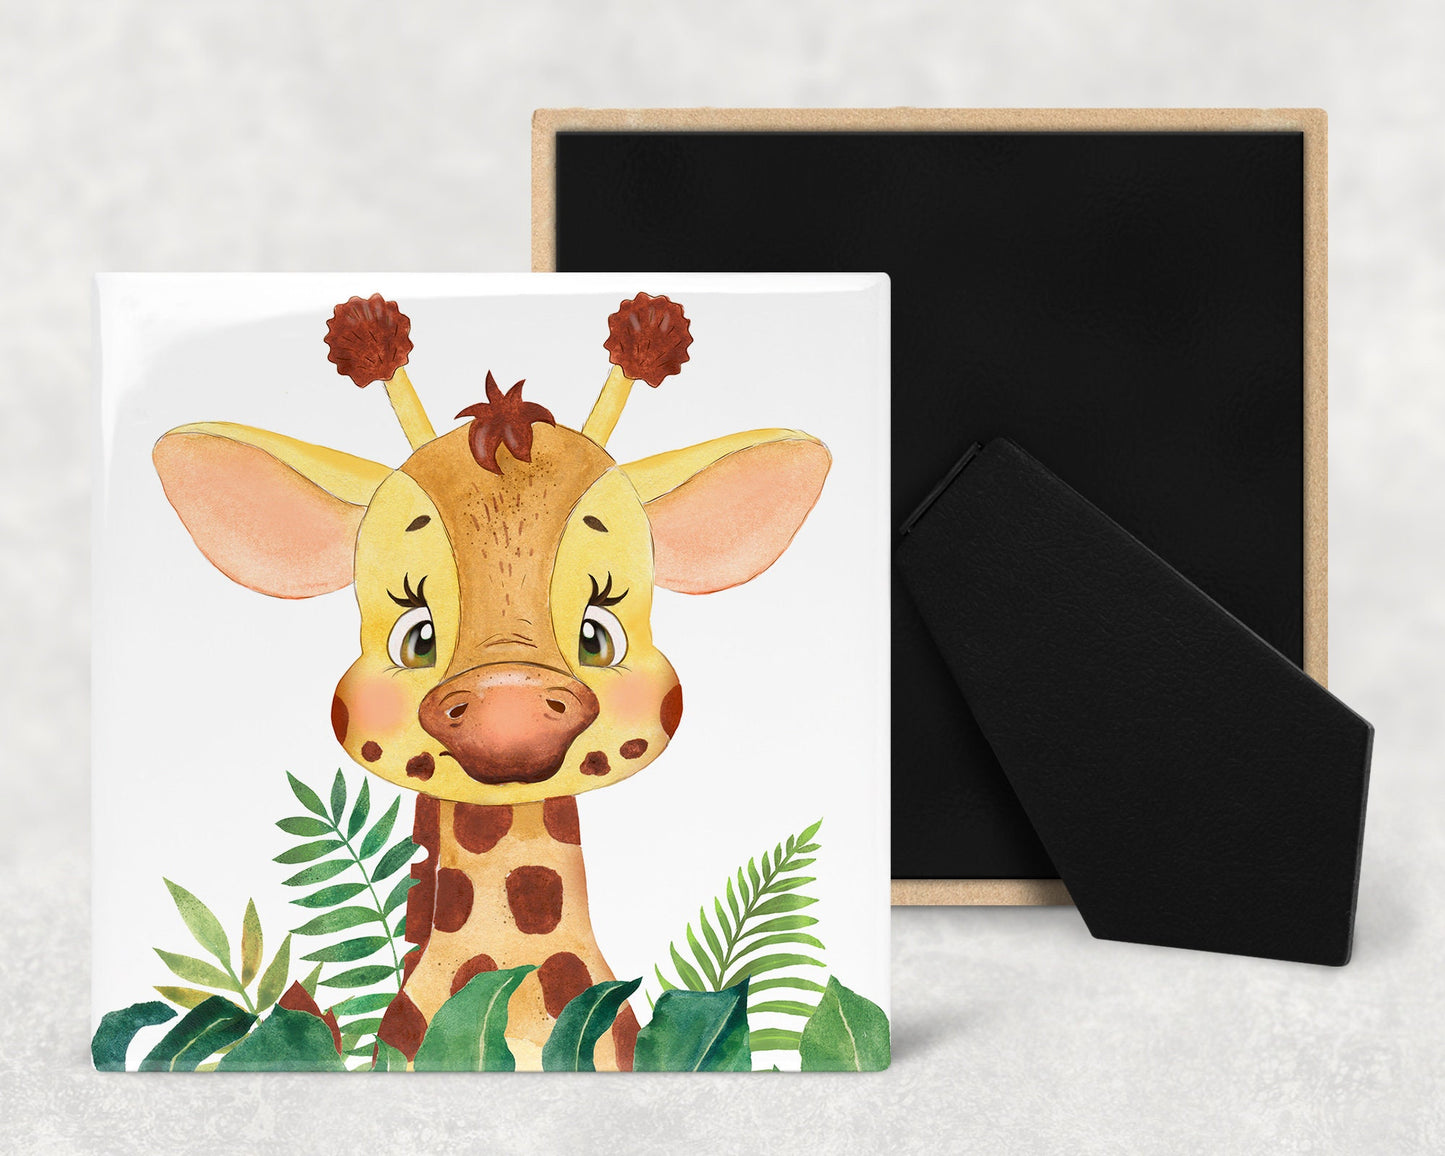 Cute Baby Giraffe Nursery Art Decorative Ceramic Tile with Optional Easel Back - Available in 3 Sizes